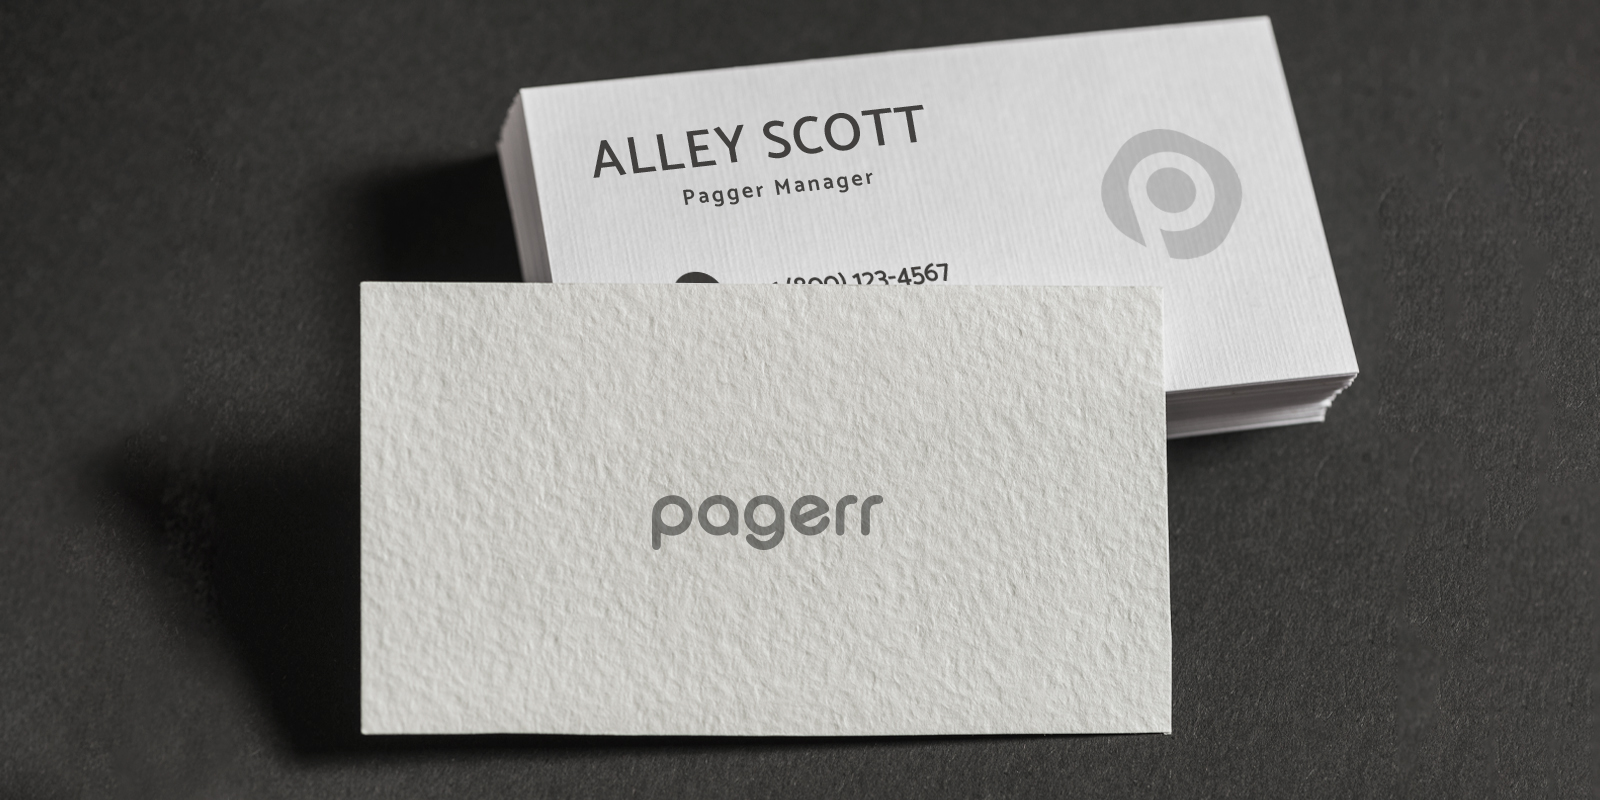 Special material business cards in Ballarat - Print with Pagerr